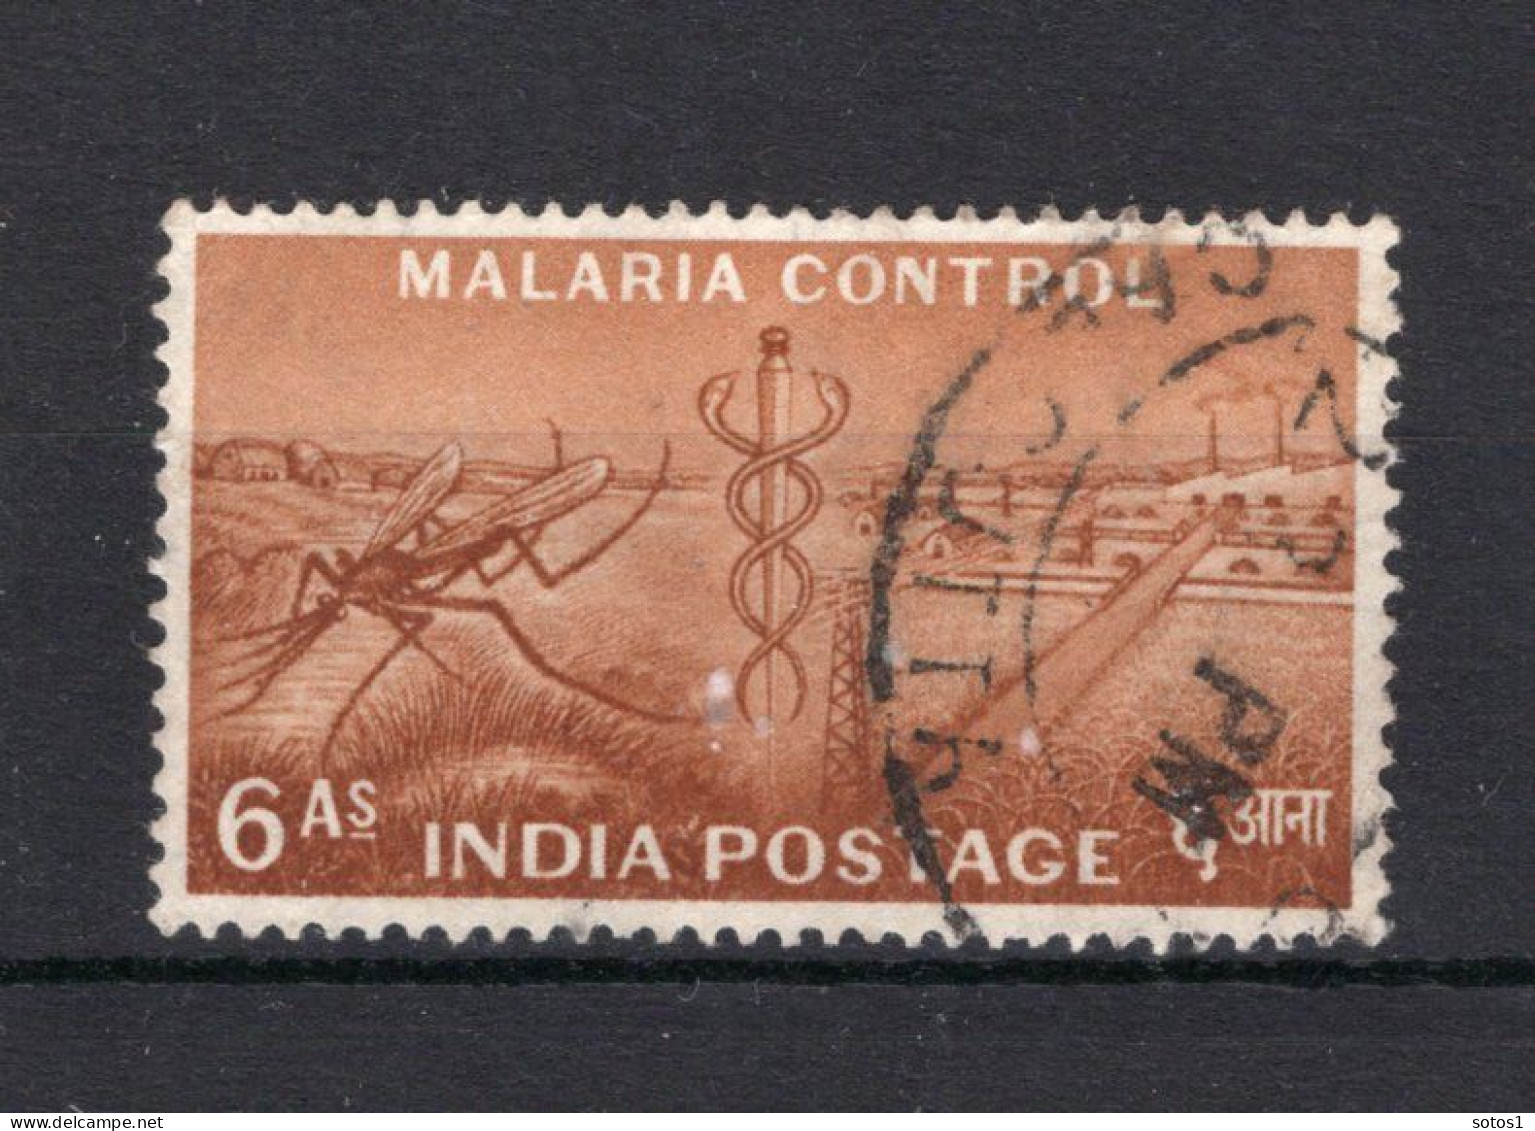 INDIA Yt. 67° Gestempeld 1955 - Used Stamps